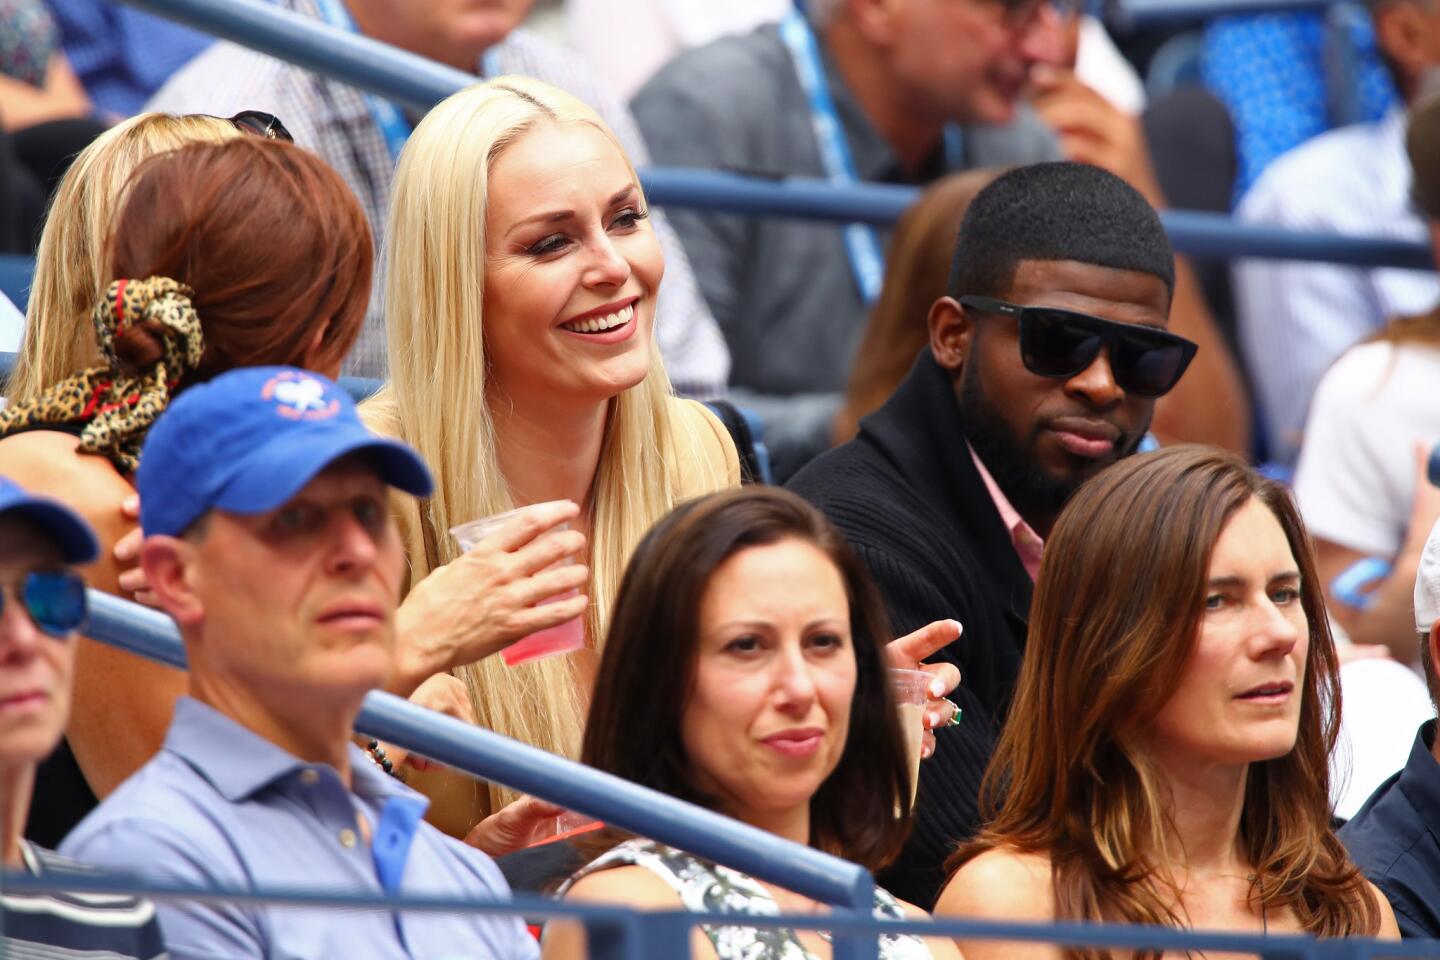 Lindsey Vonn, professional ski racer, and NHL player P.K. Subban watch the Men's Singles final match between Rafael Nadal of Spain and Daniil Medvedev of Russia on day fourteen of the 2019 U.S. Open at the USTA Billie Jean King National Tennis Center on Sept. 8, 2019, in Queens.